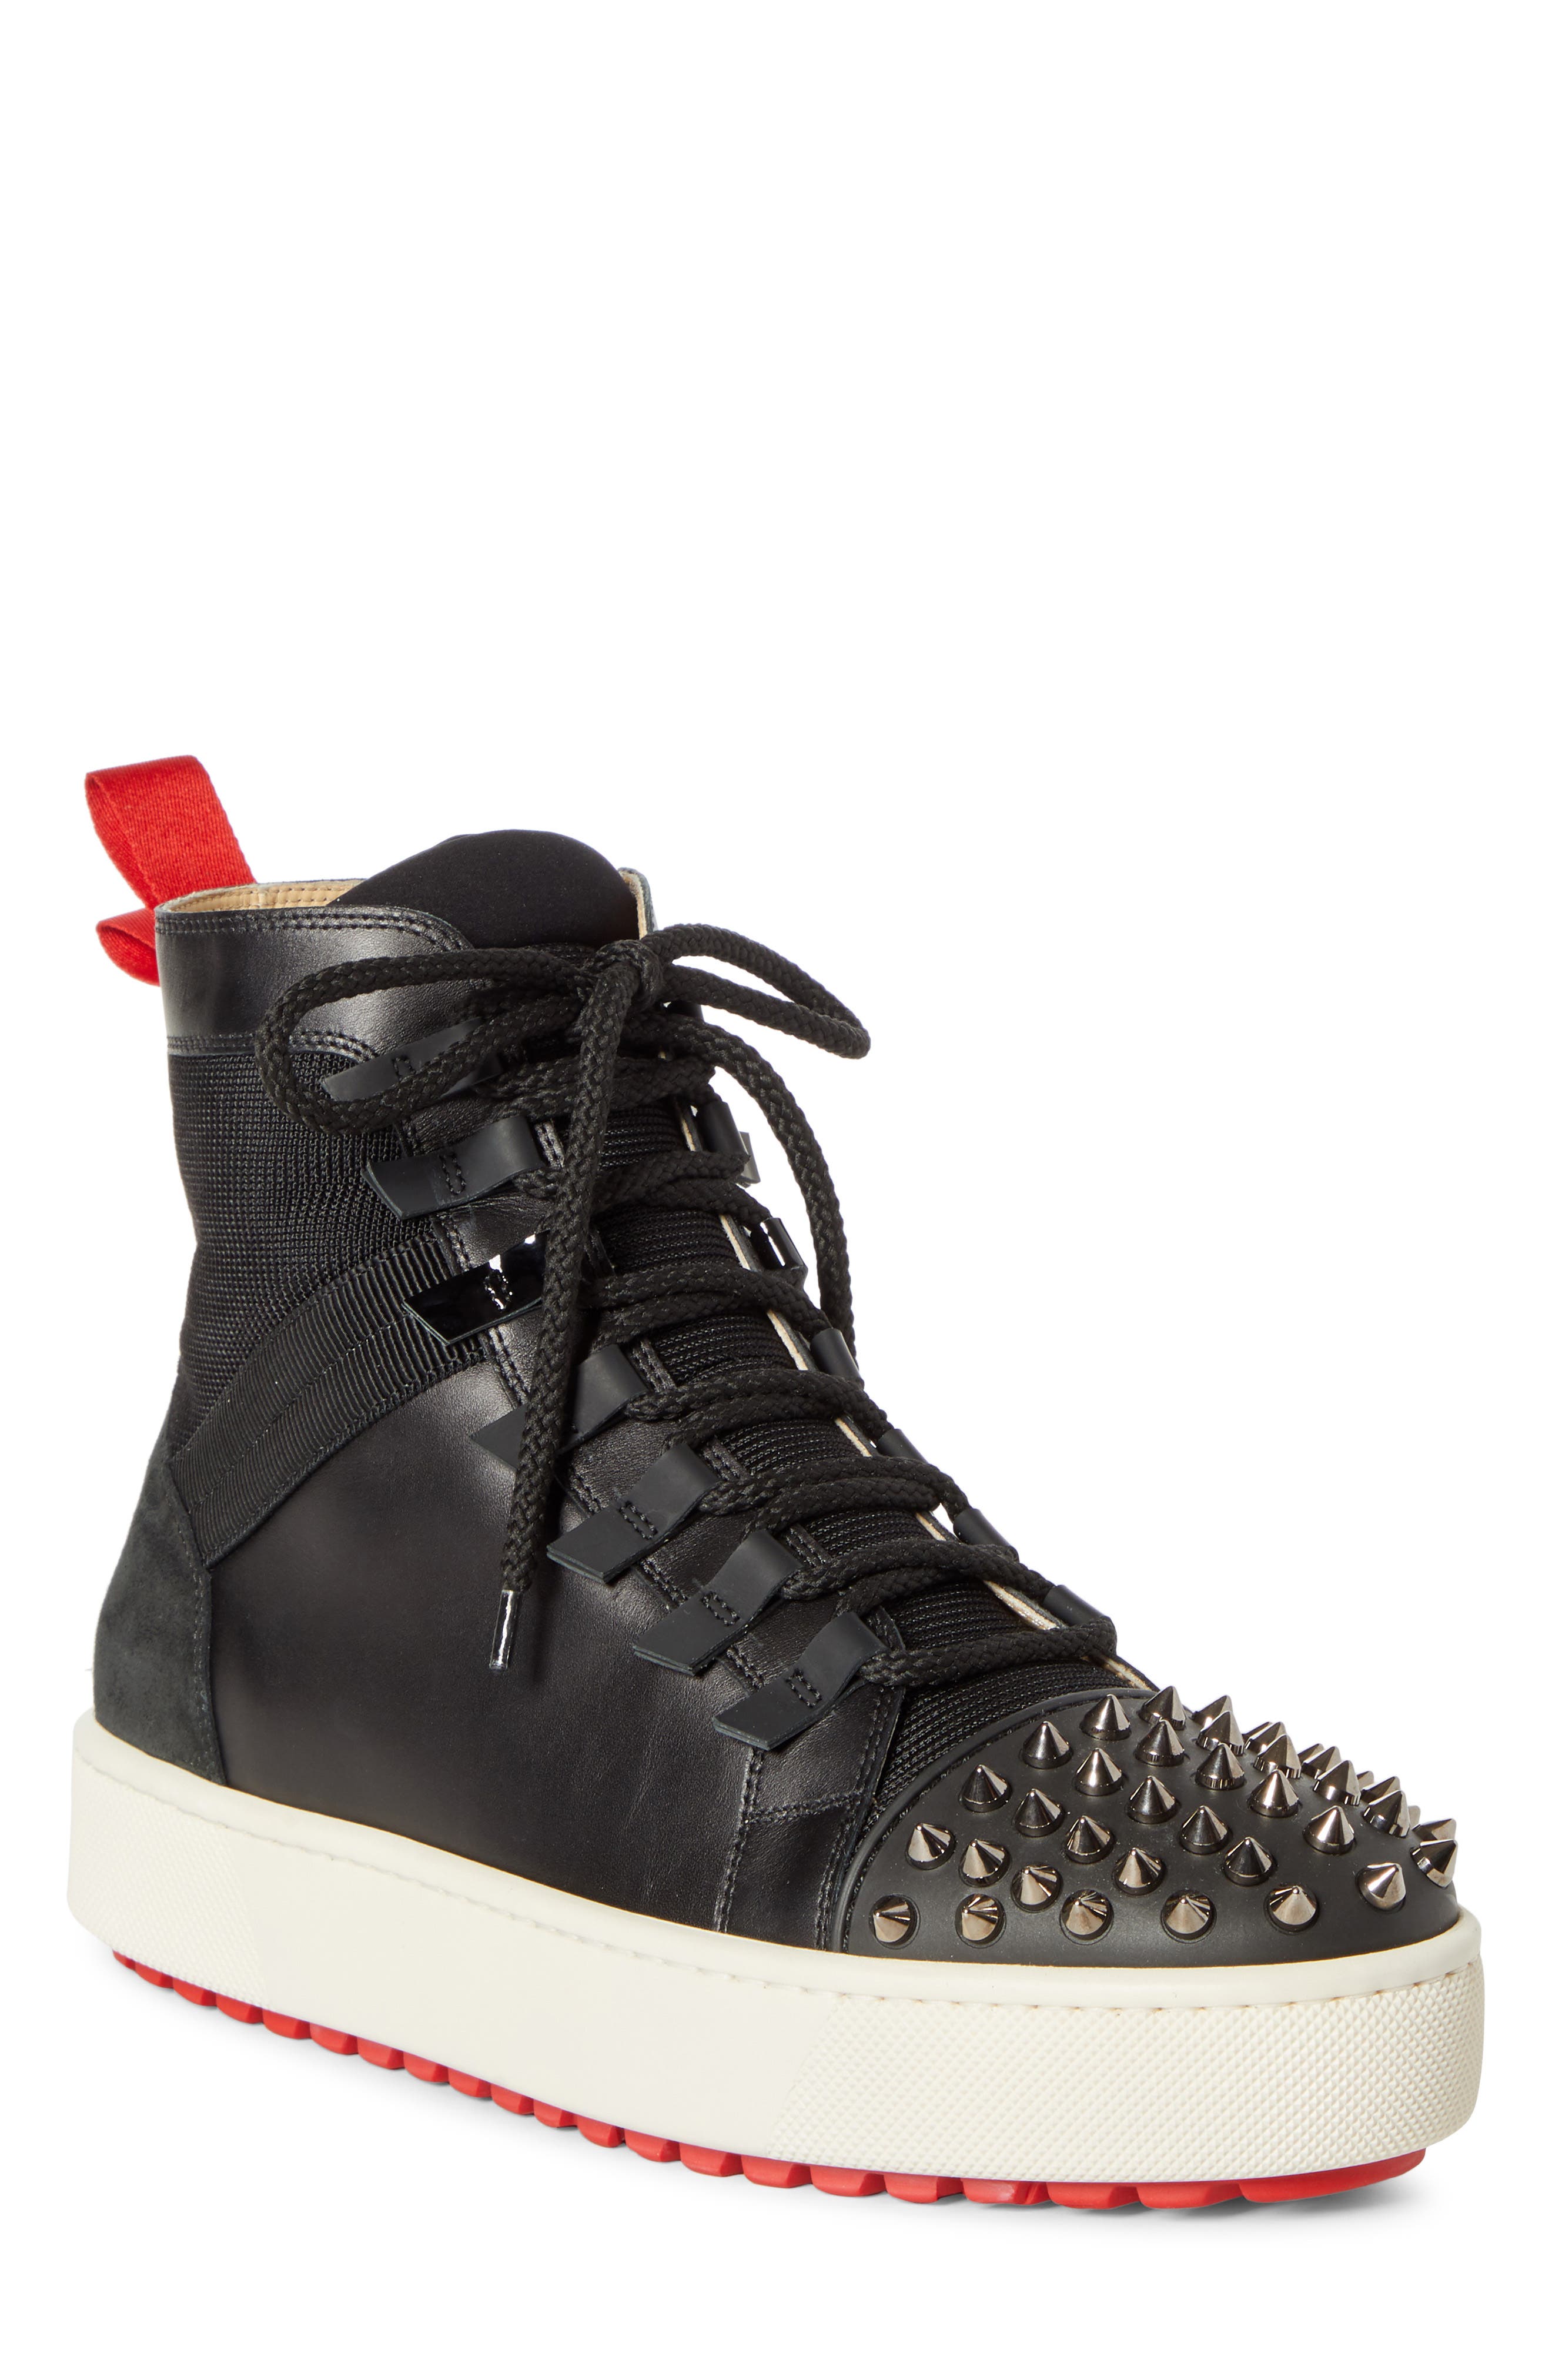 christian louboutin black spiked sneakers